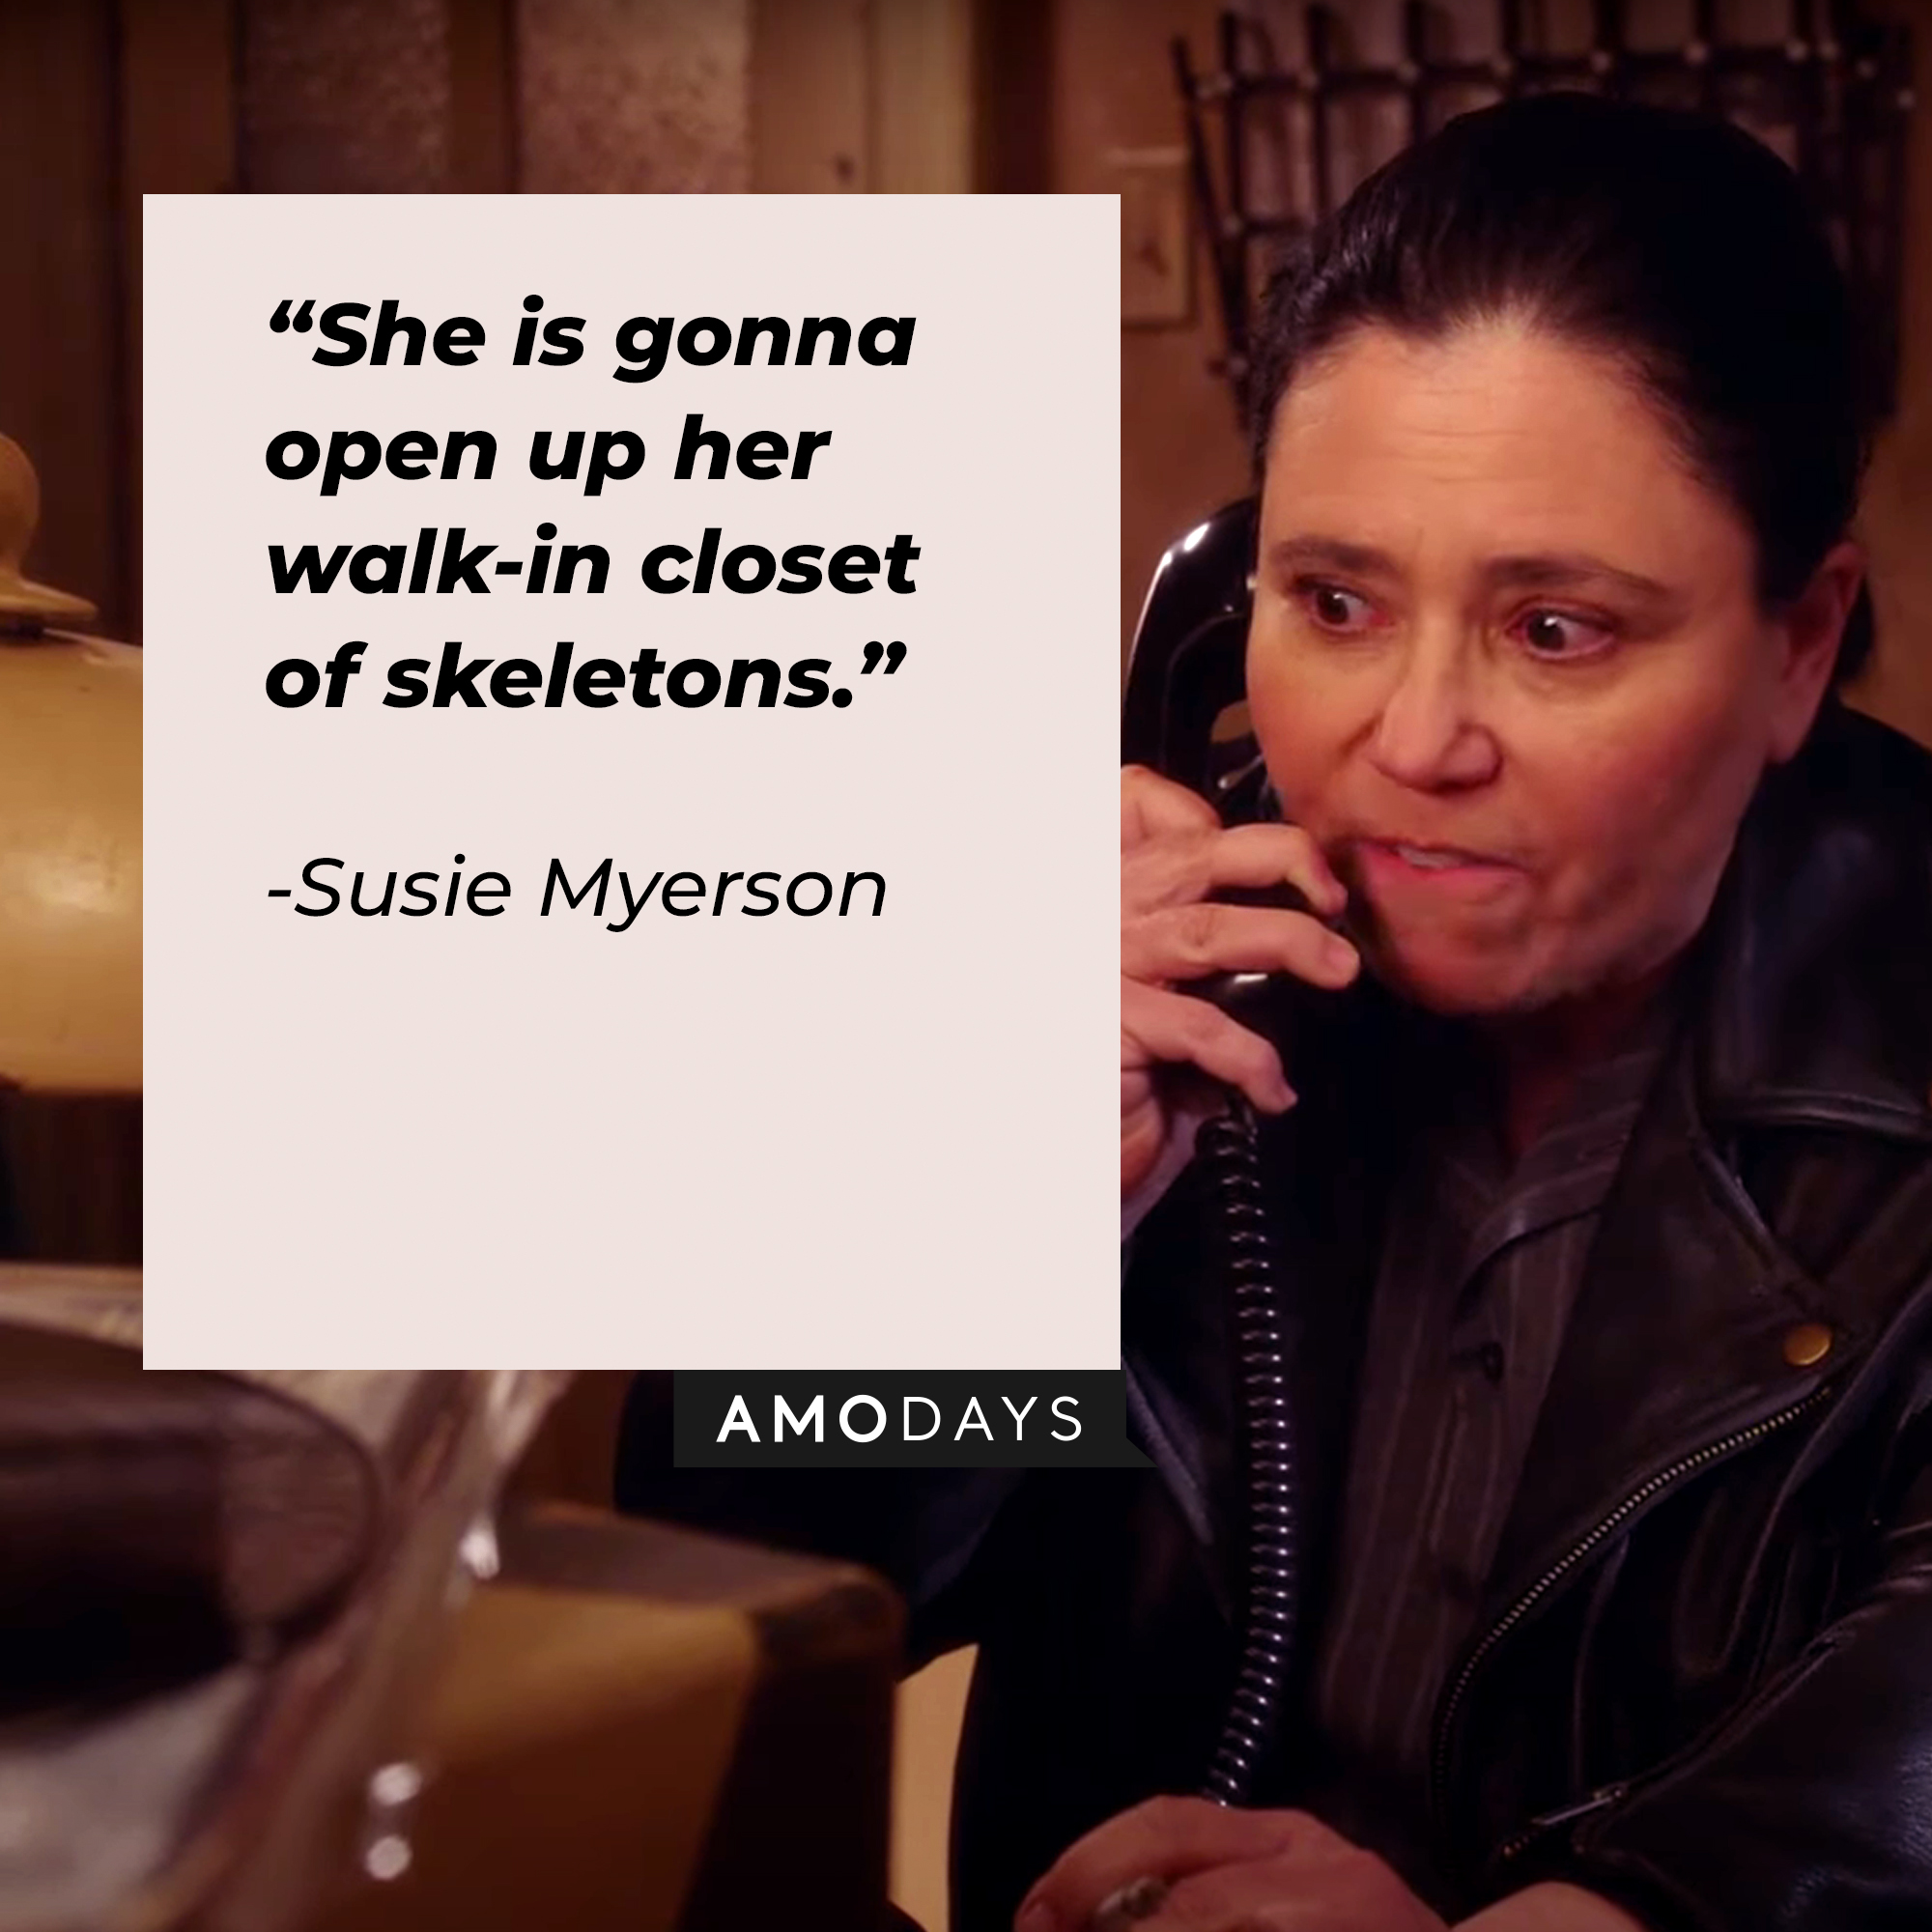 Susie Myerson with her quote: “She is gonna open up her walk-in closet of skeletons.”   | Source: youtube.com/PrimeVideoUK